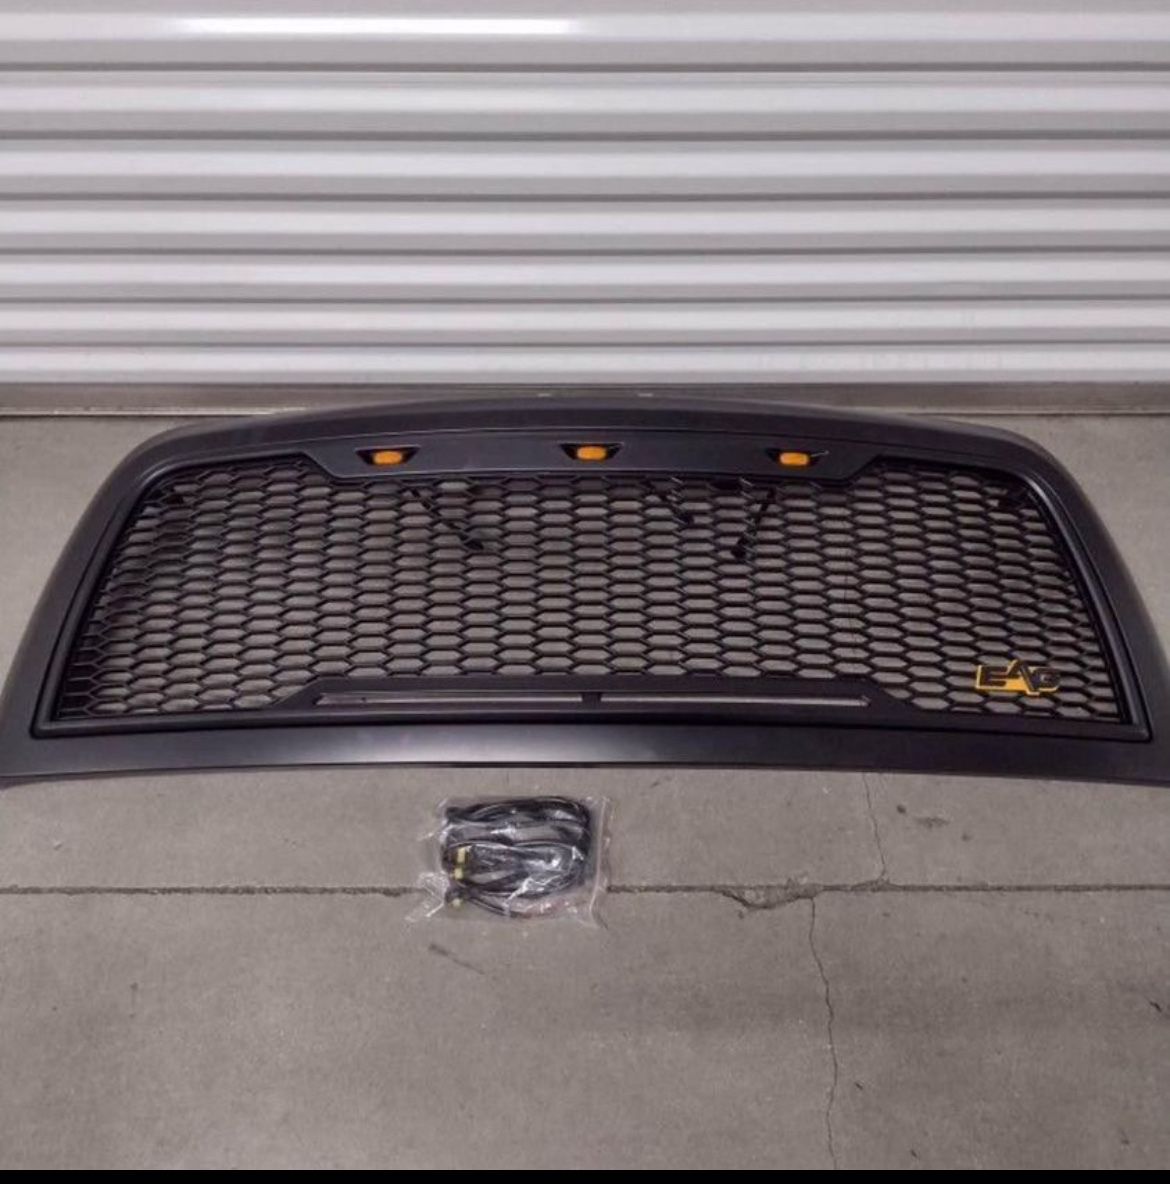 10-12 dodge ram 2500/3500 mesh grille with amber led lights parrilla con luces